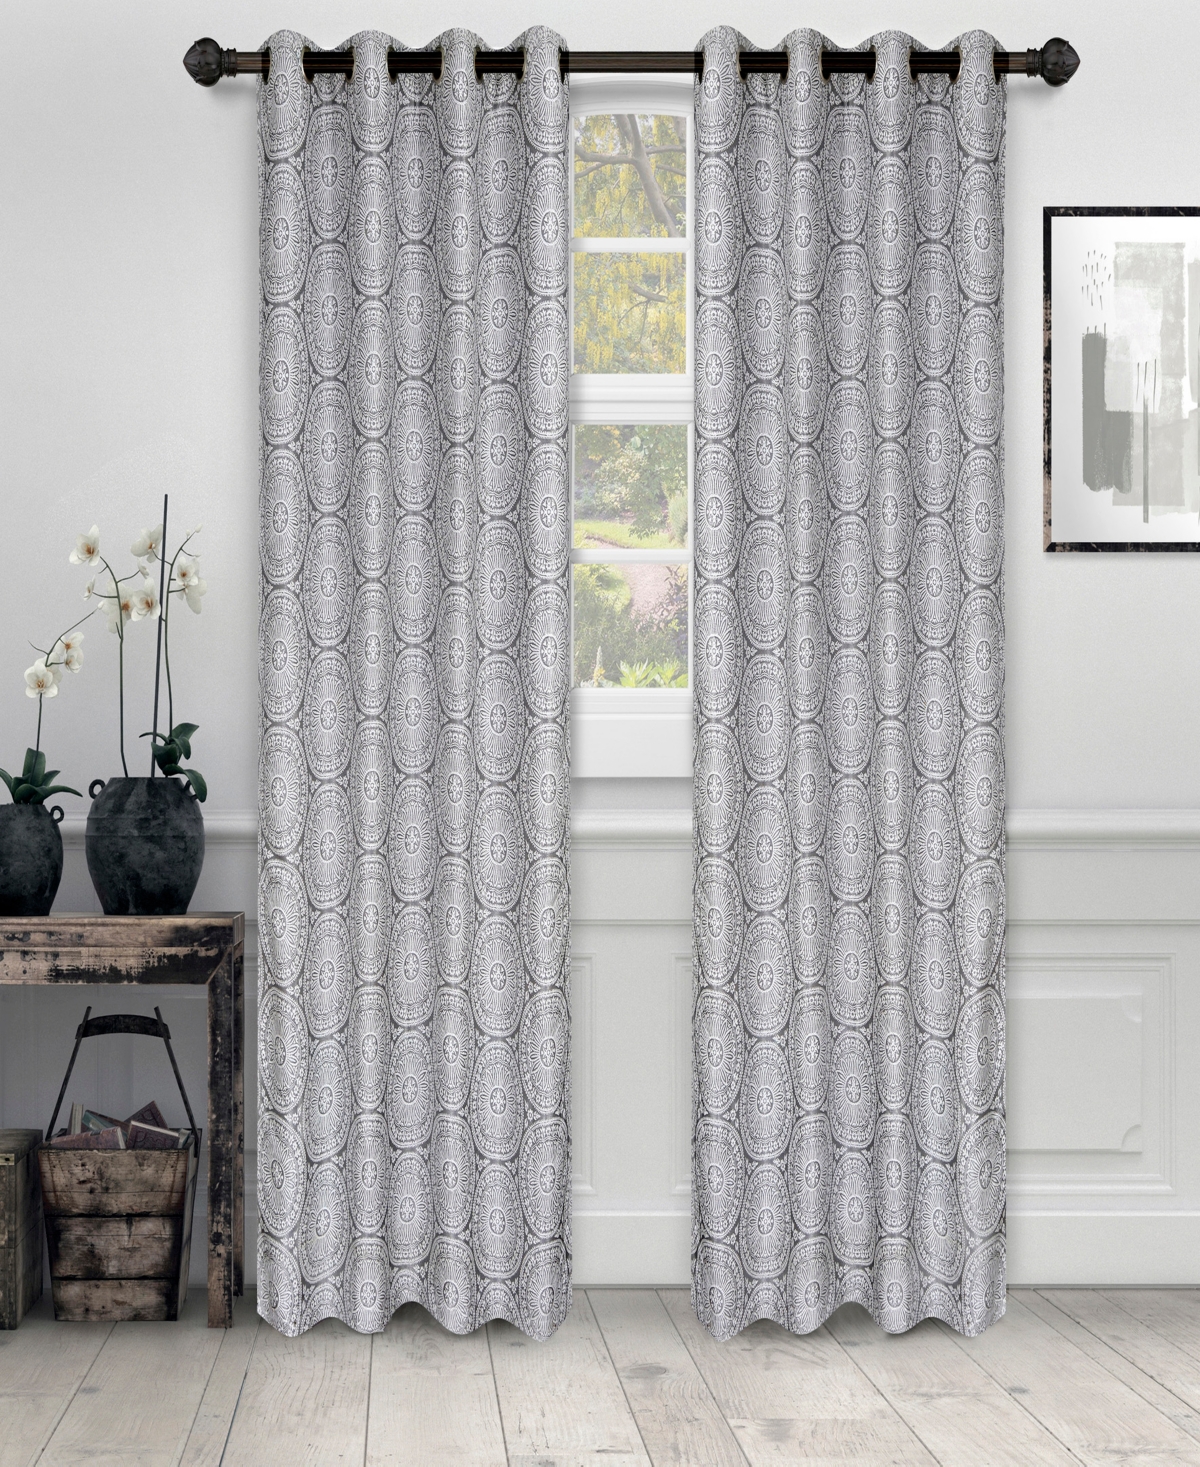 Traditional Eminence Jacquard 2-Piece Curtain Panels with Grommet Header Top, 52" X 108" - Silver